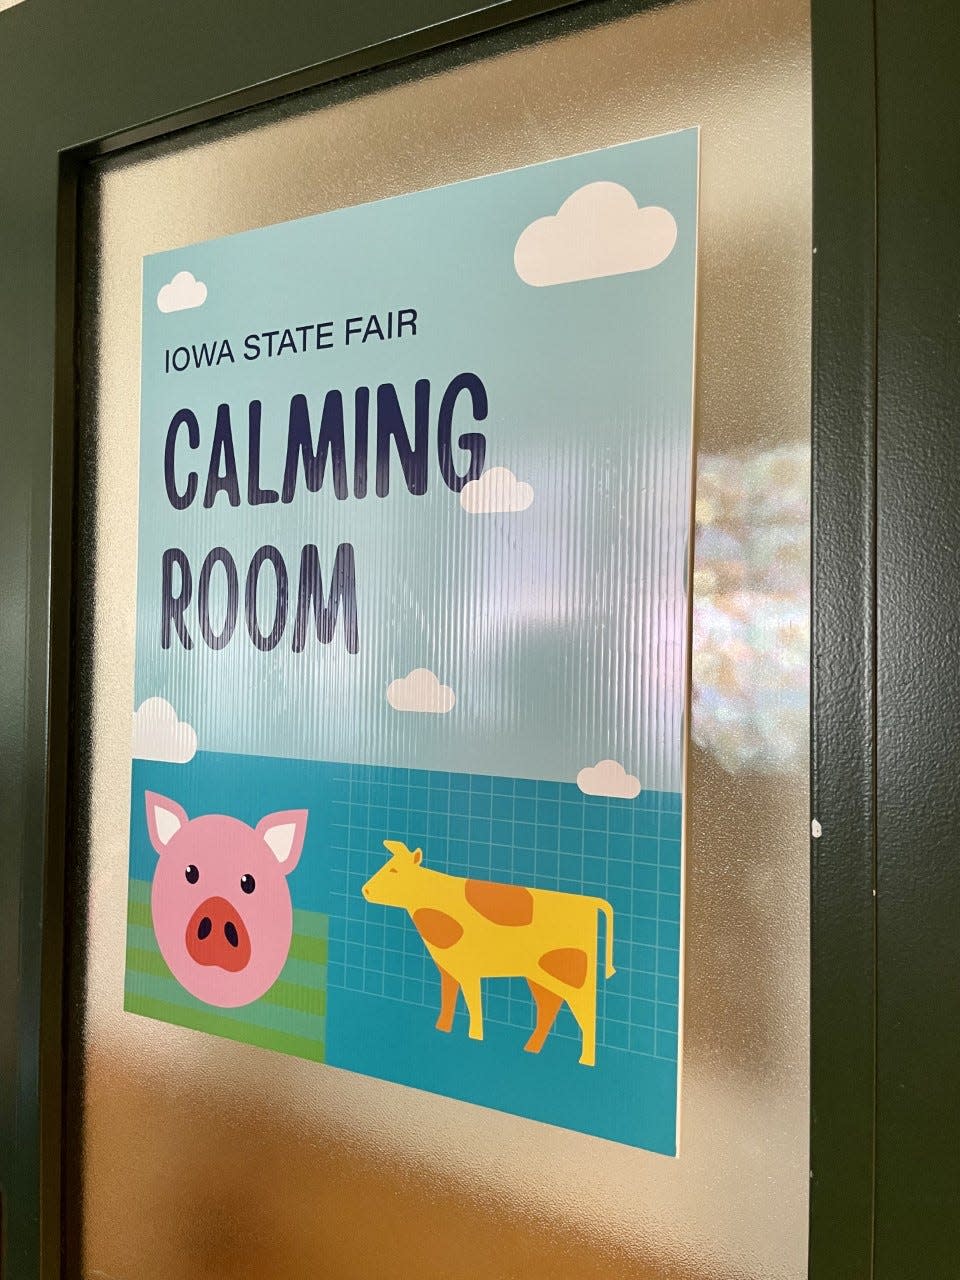 A calming room located in the Robert G. Horner and Sheri Avis Horner Service Center provided a sensory-friendly spot away from the overstimulation of the fair.